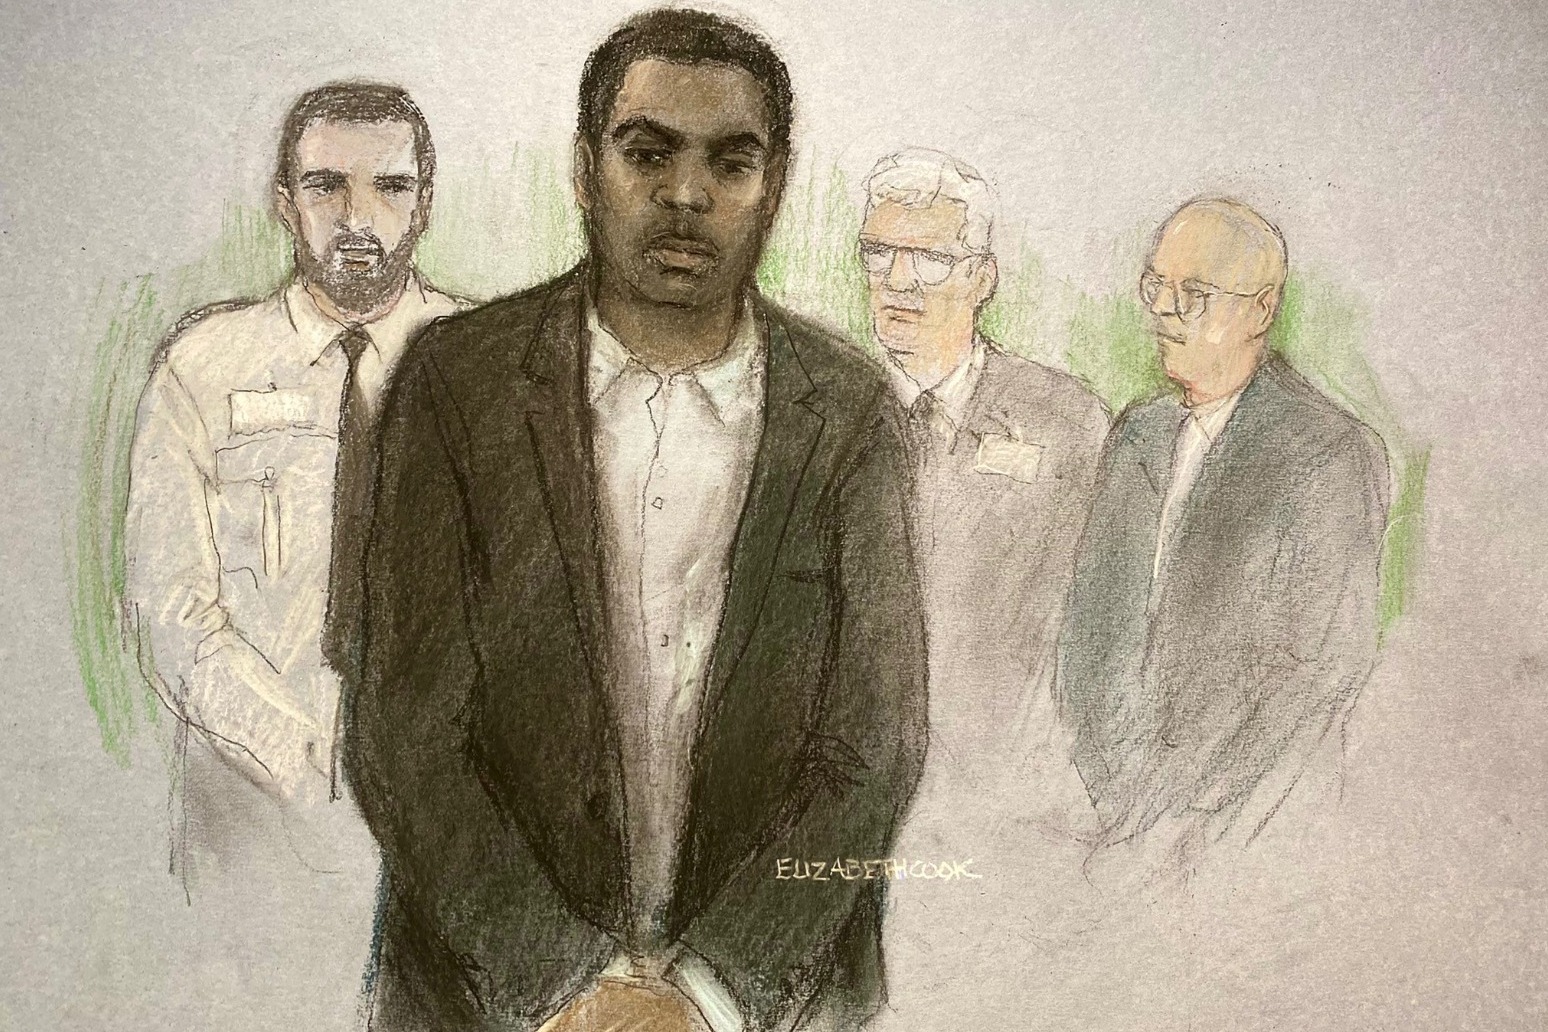 Attorney General reviewing whether Nottingham attacker sentence too lenient 